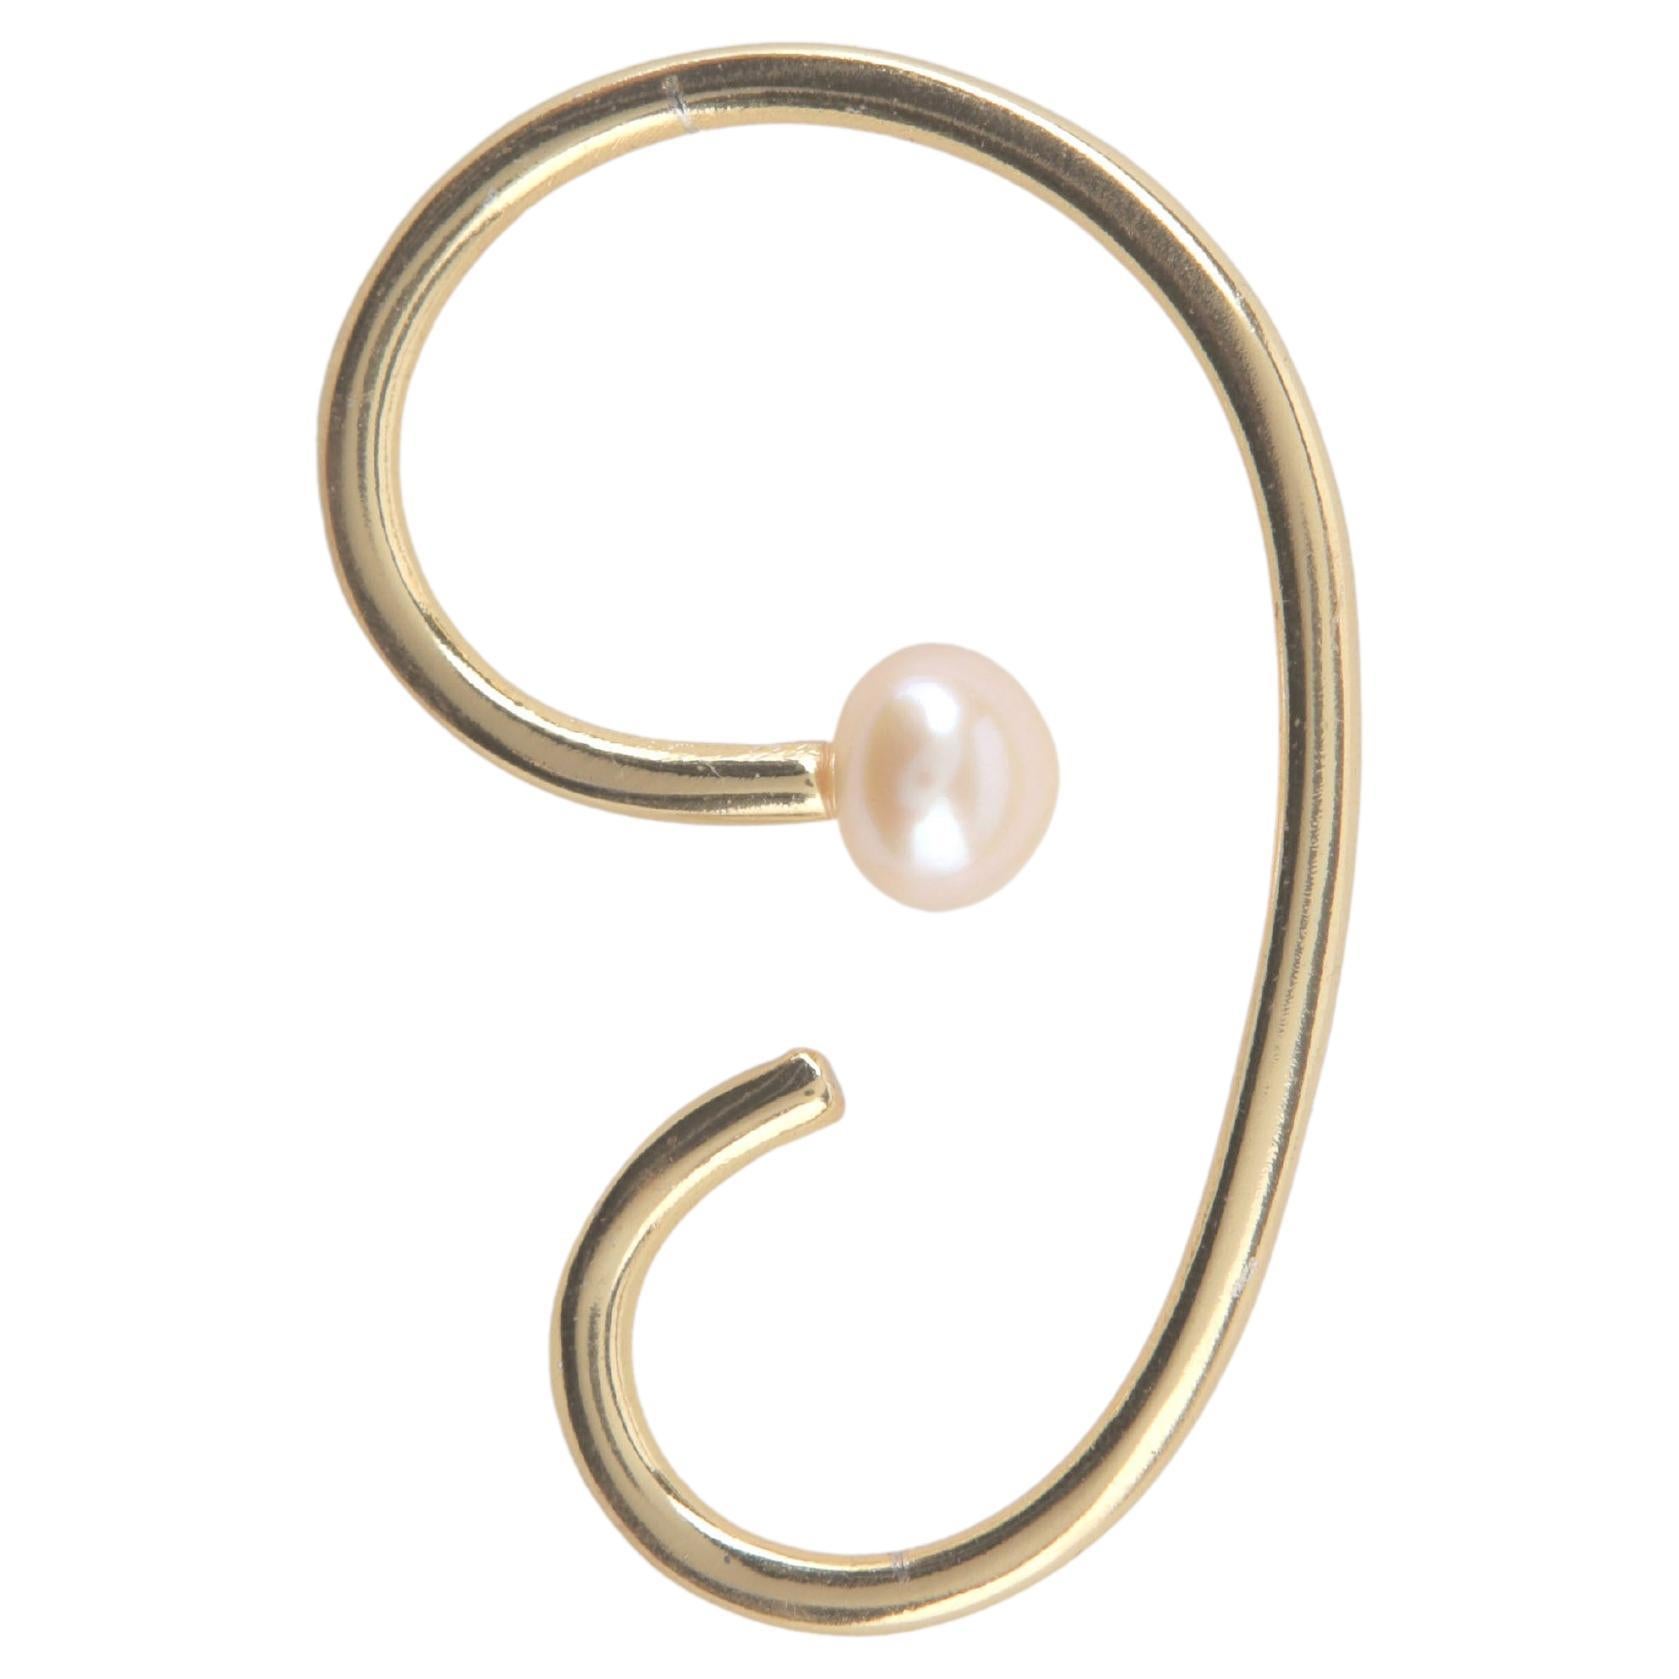 Coco Perle Gold Ohrring im Angebot